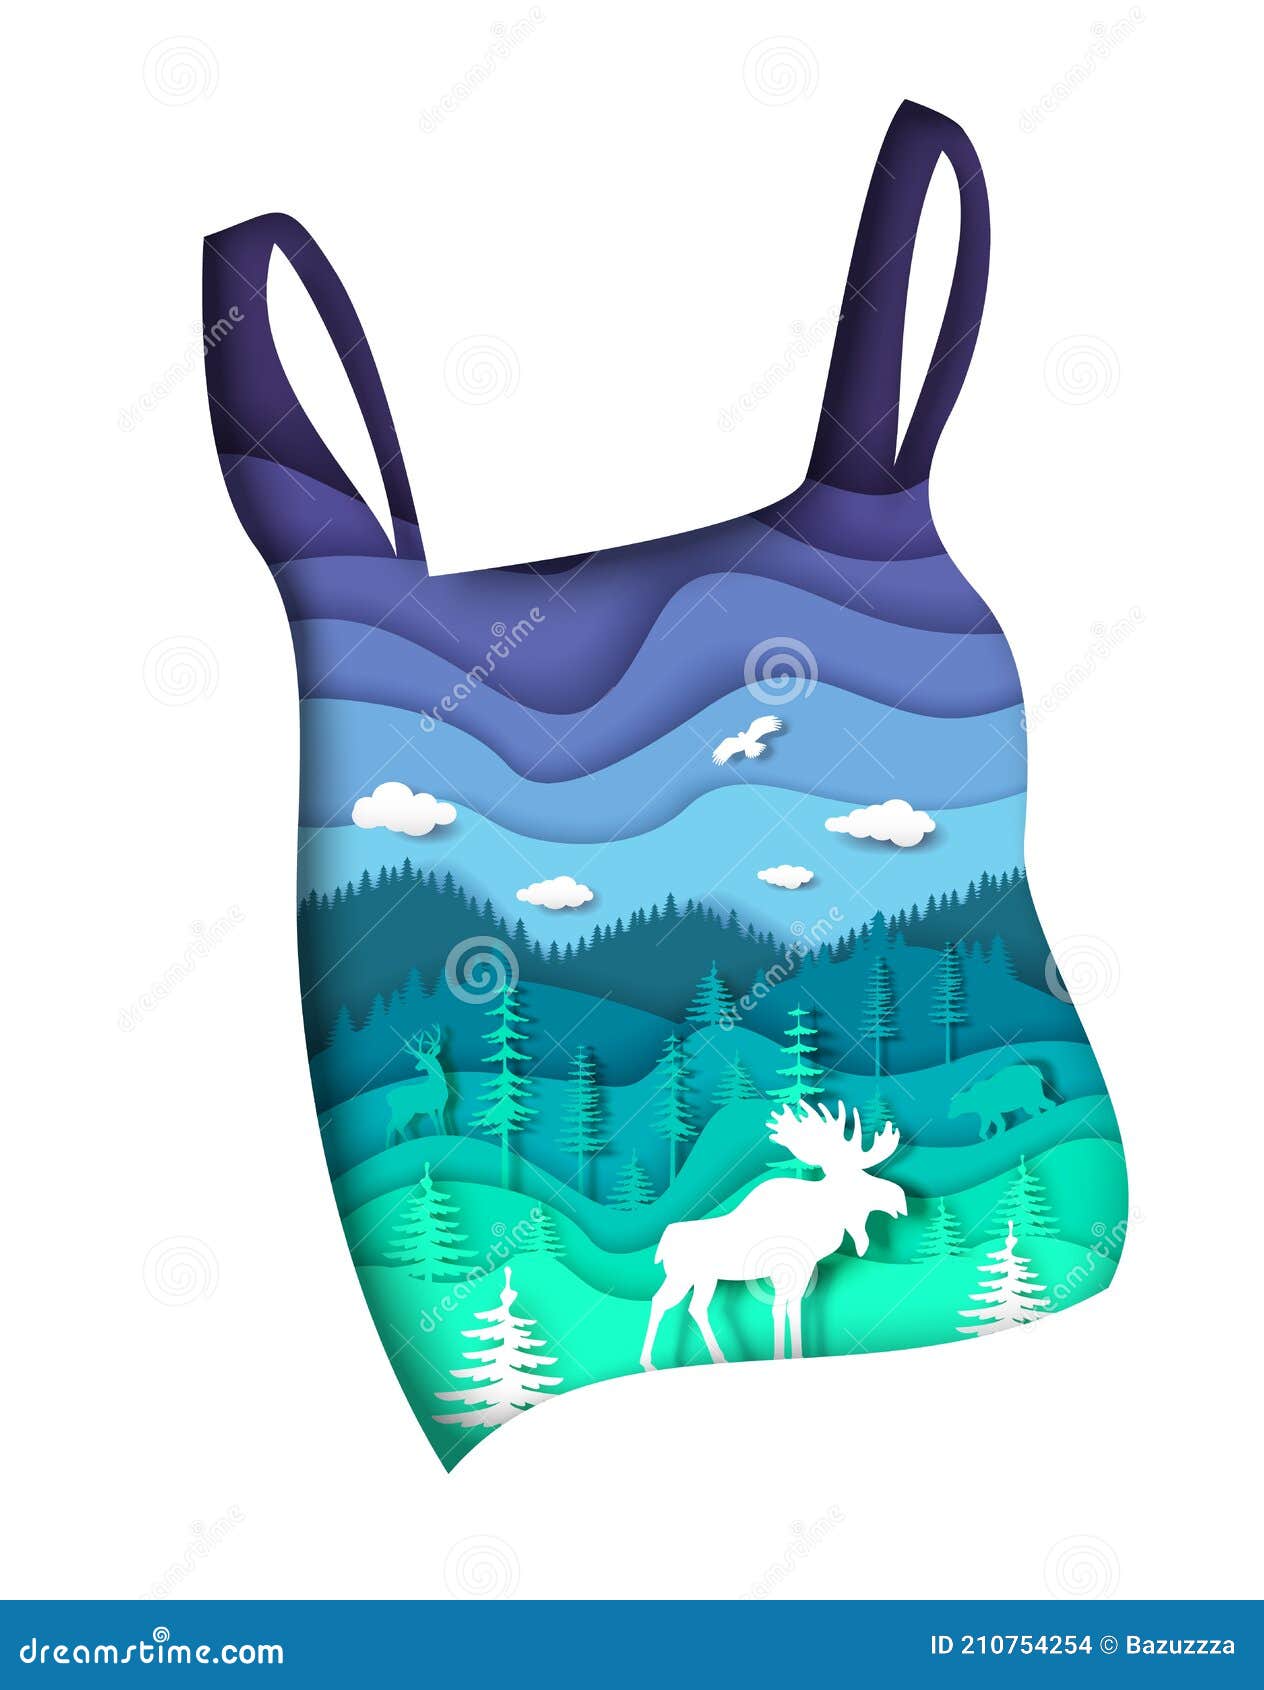 Nature Plastic Pollution Concept. Vector Paper Art Environmental and Ecology Problems. Stock Vector - Illustration of wild, problem: 210754254